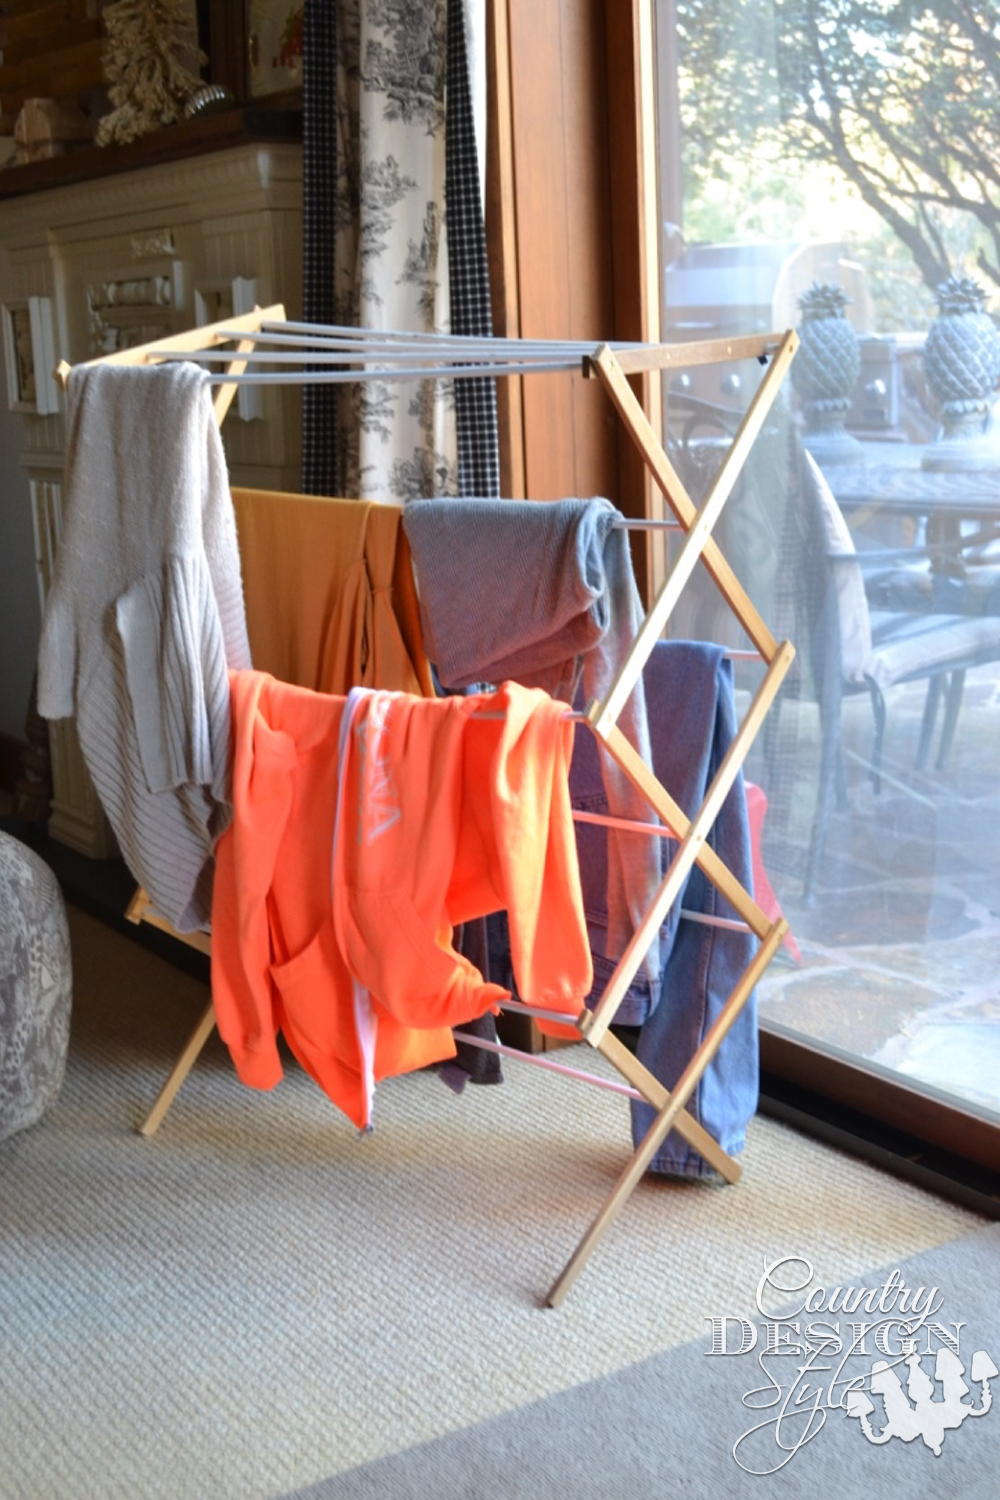 Wonky drying rack | Country Design Style | countrydesignstyle.com